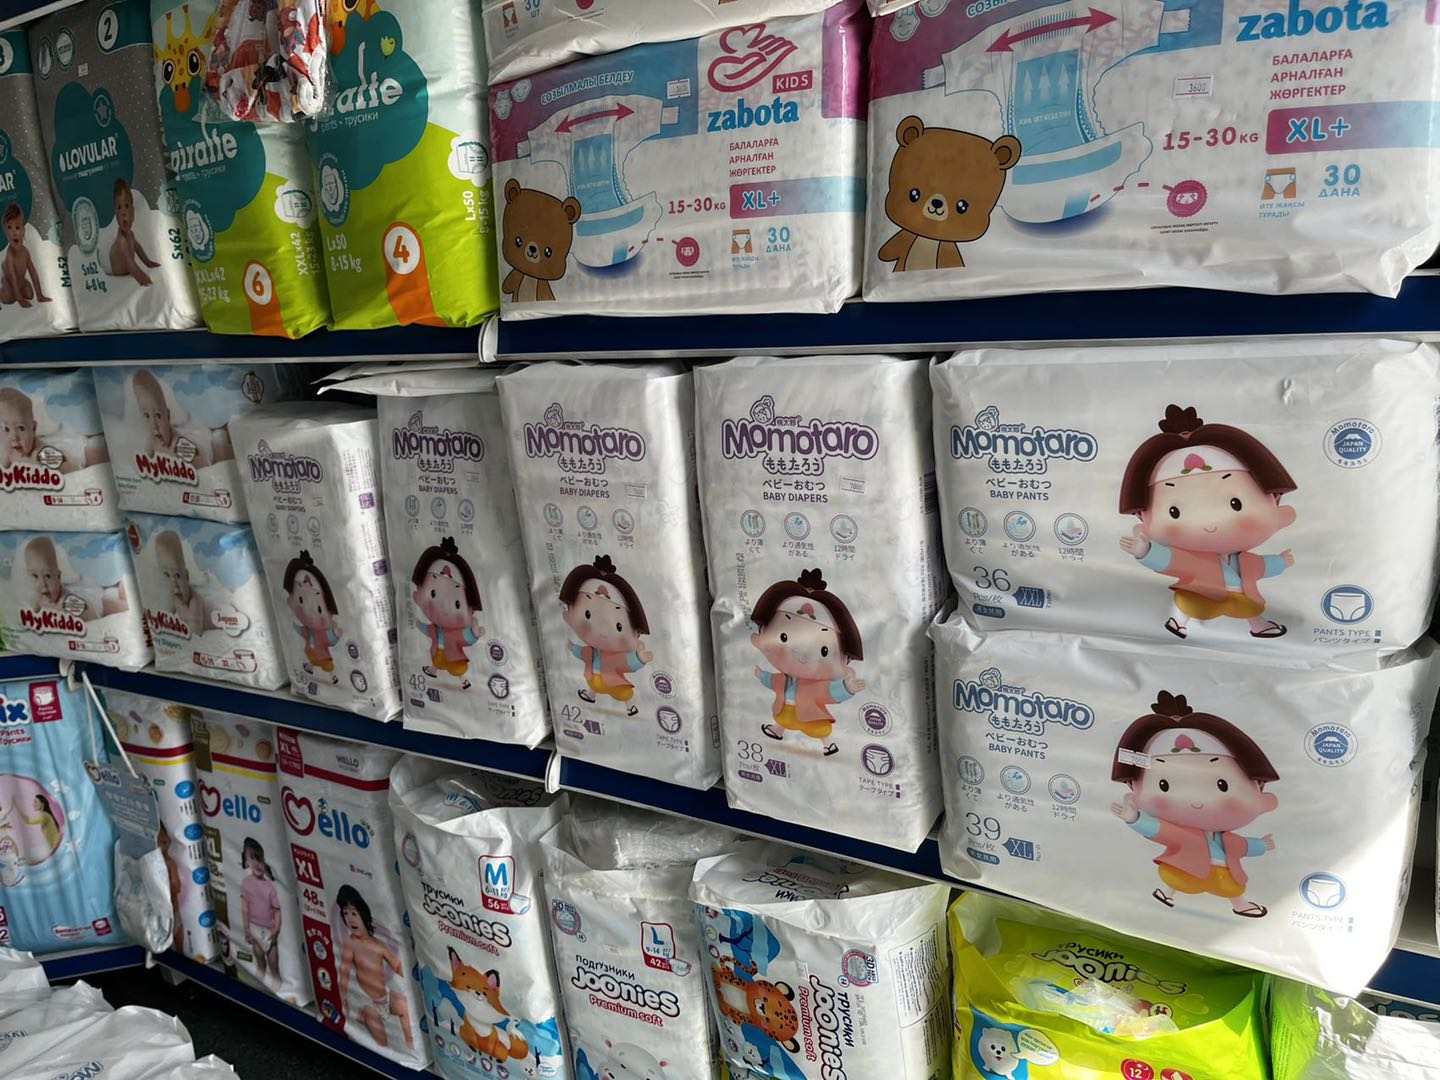 Momotaro's Offline Maternal And Child Products Sales Cover Many Cities in Five Central Asian Countries.